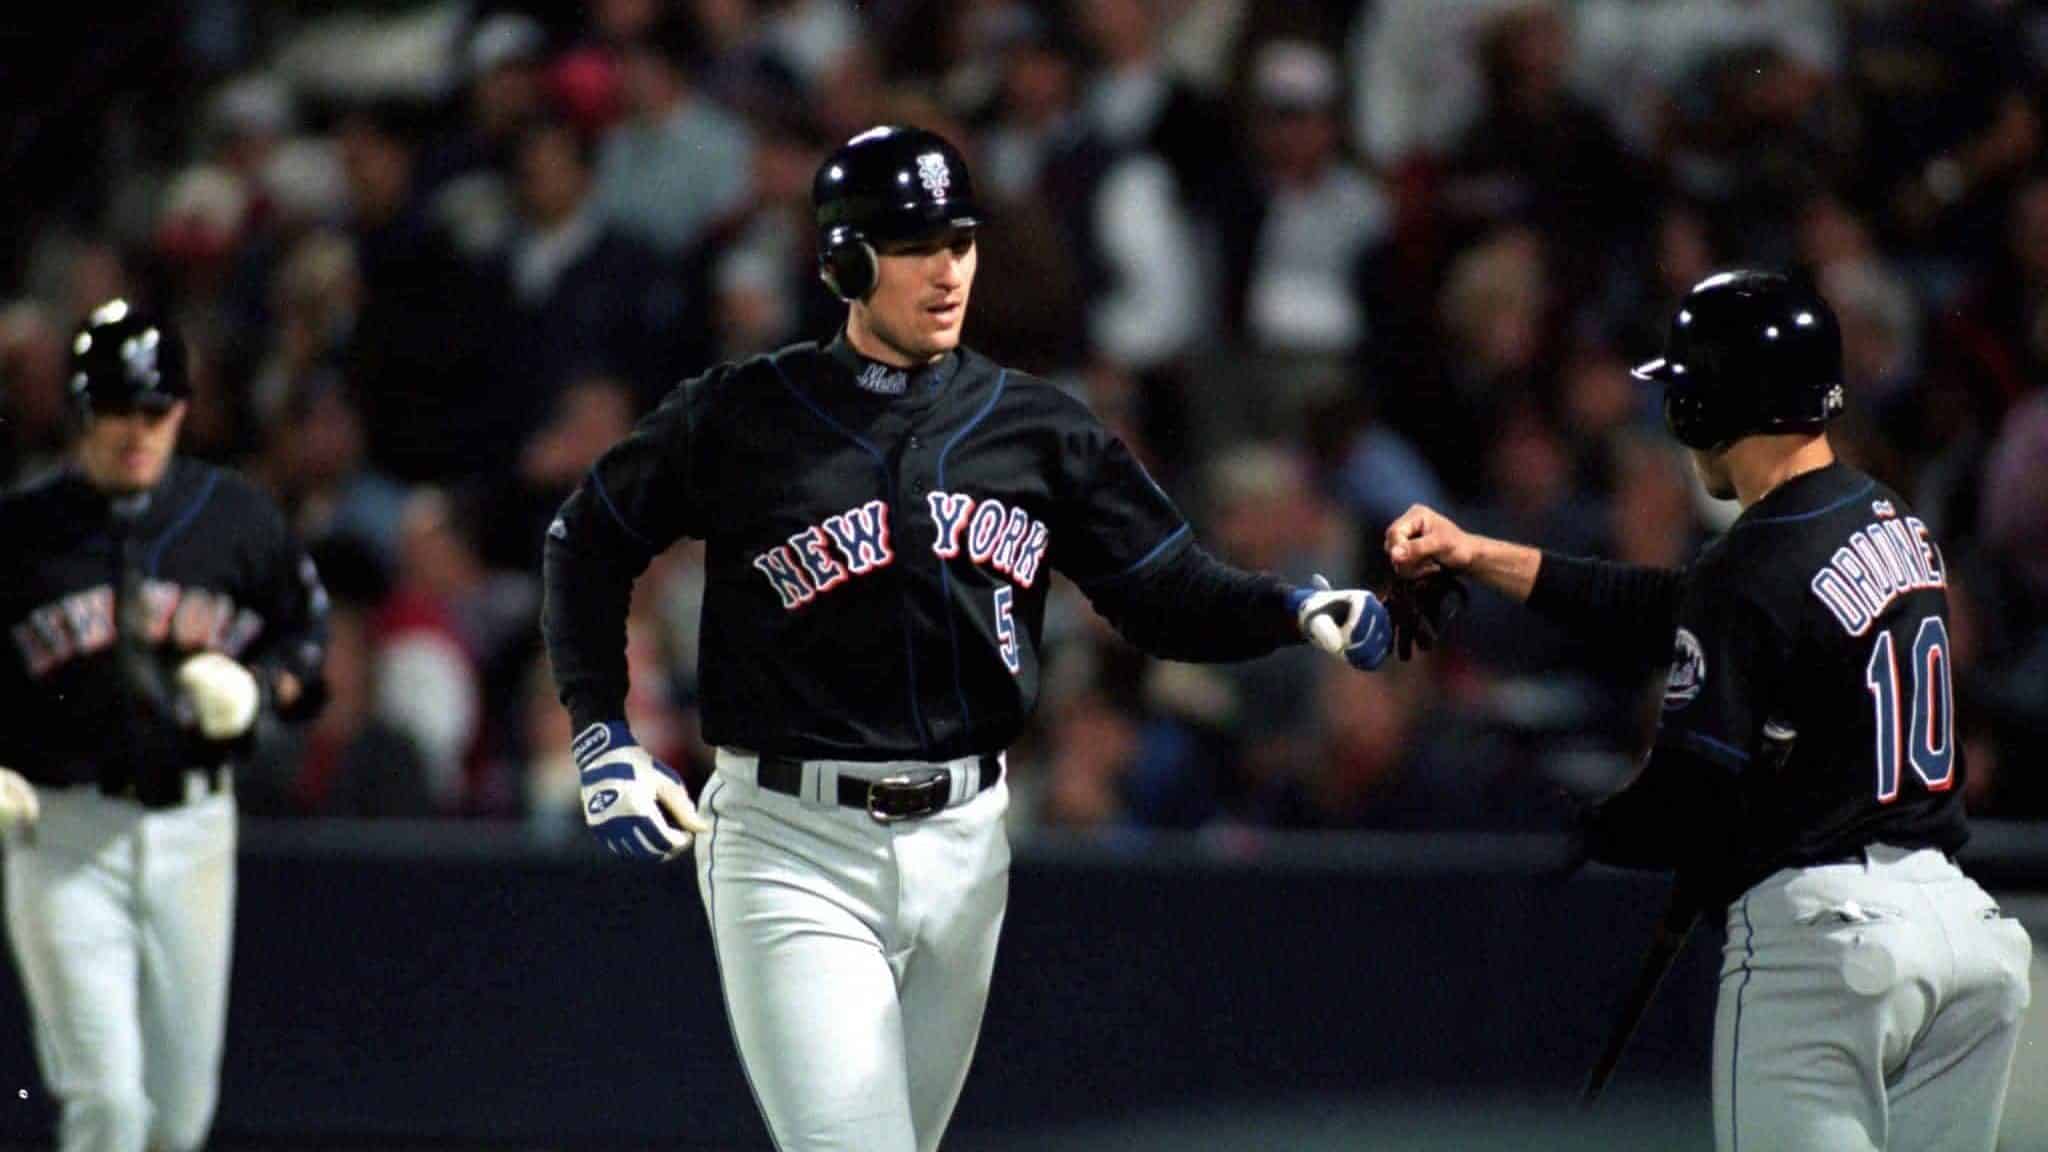 19 Oct 1999: John Olerud #5 of the New York Mets celebrates as he runs the base during the National League Championship Series game six against the Atlanta Braves at Turner Field in Atlanta, Georgia. The Braves defeated the Mets 10-9.